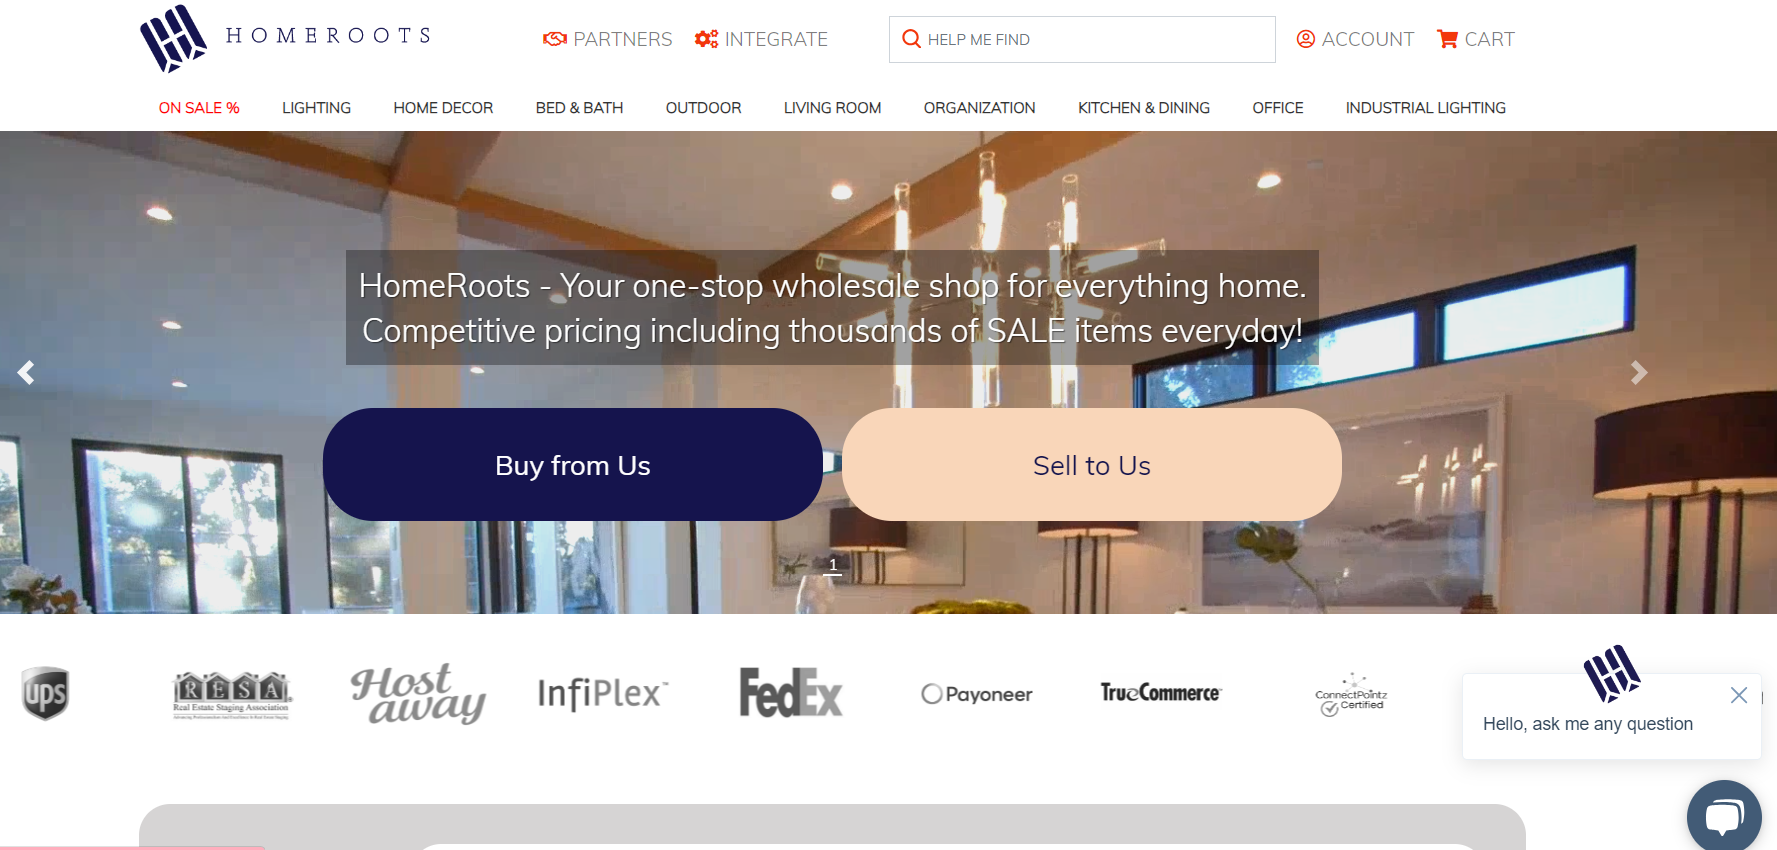 Based in New Jersey, HomeRoots is a B2B online shopping marketplace for home decor and furniture.